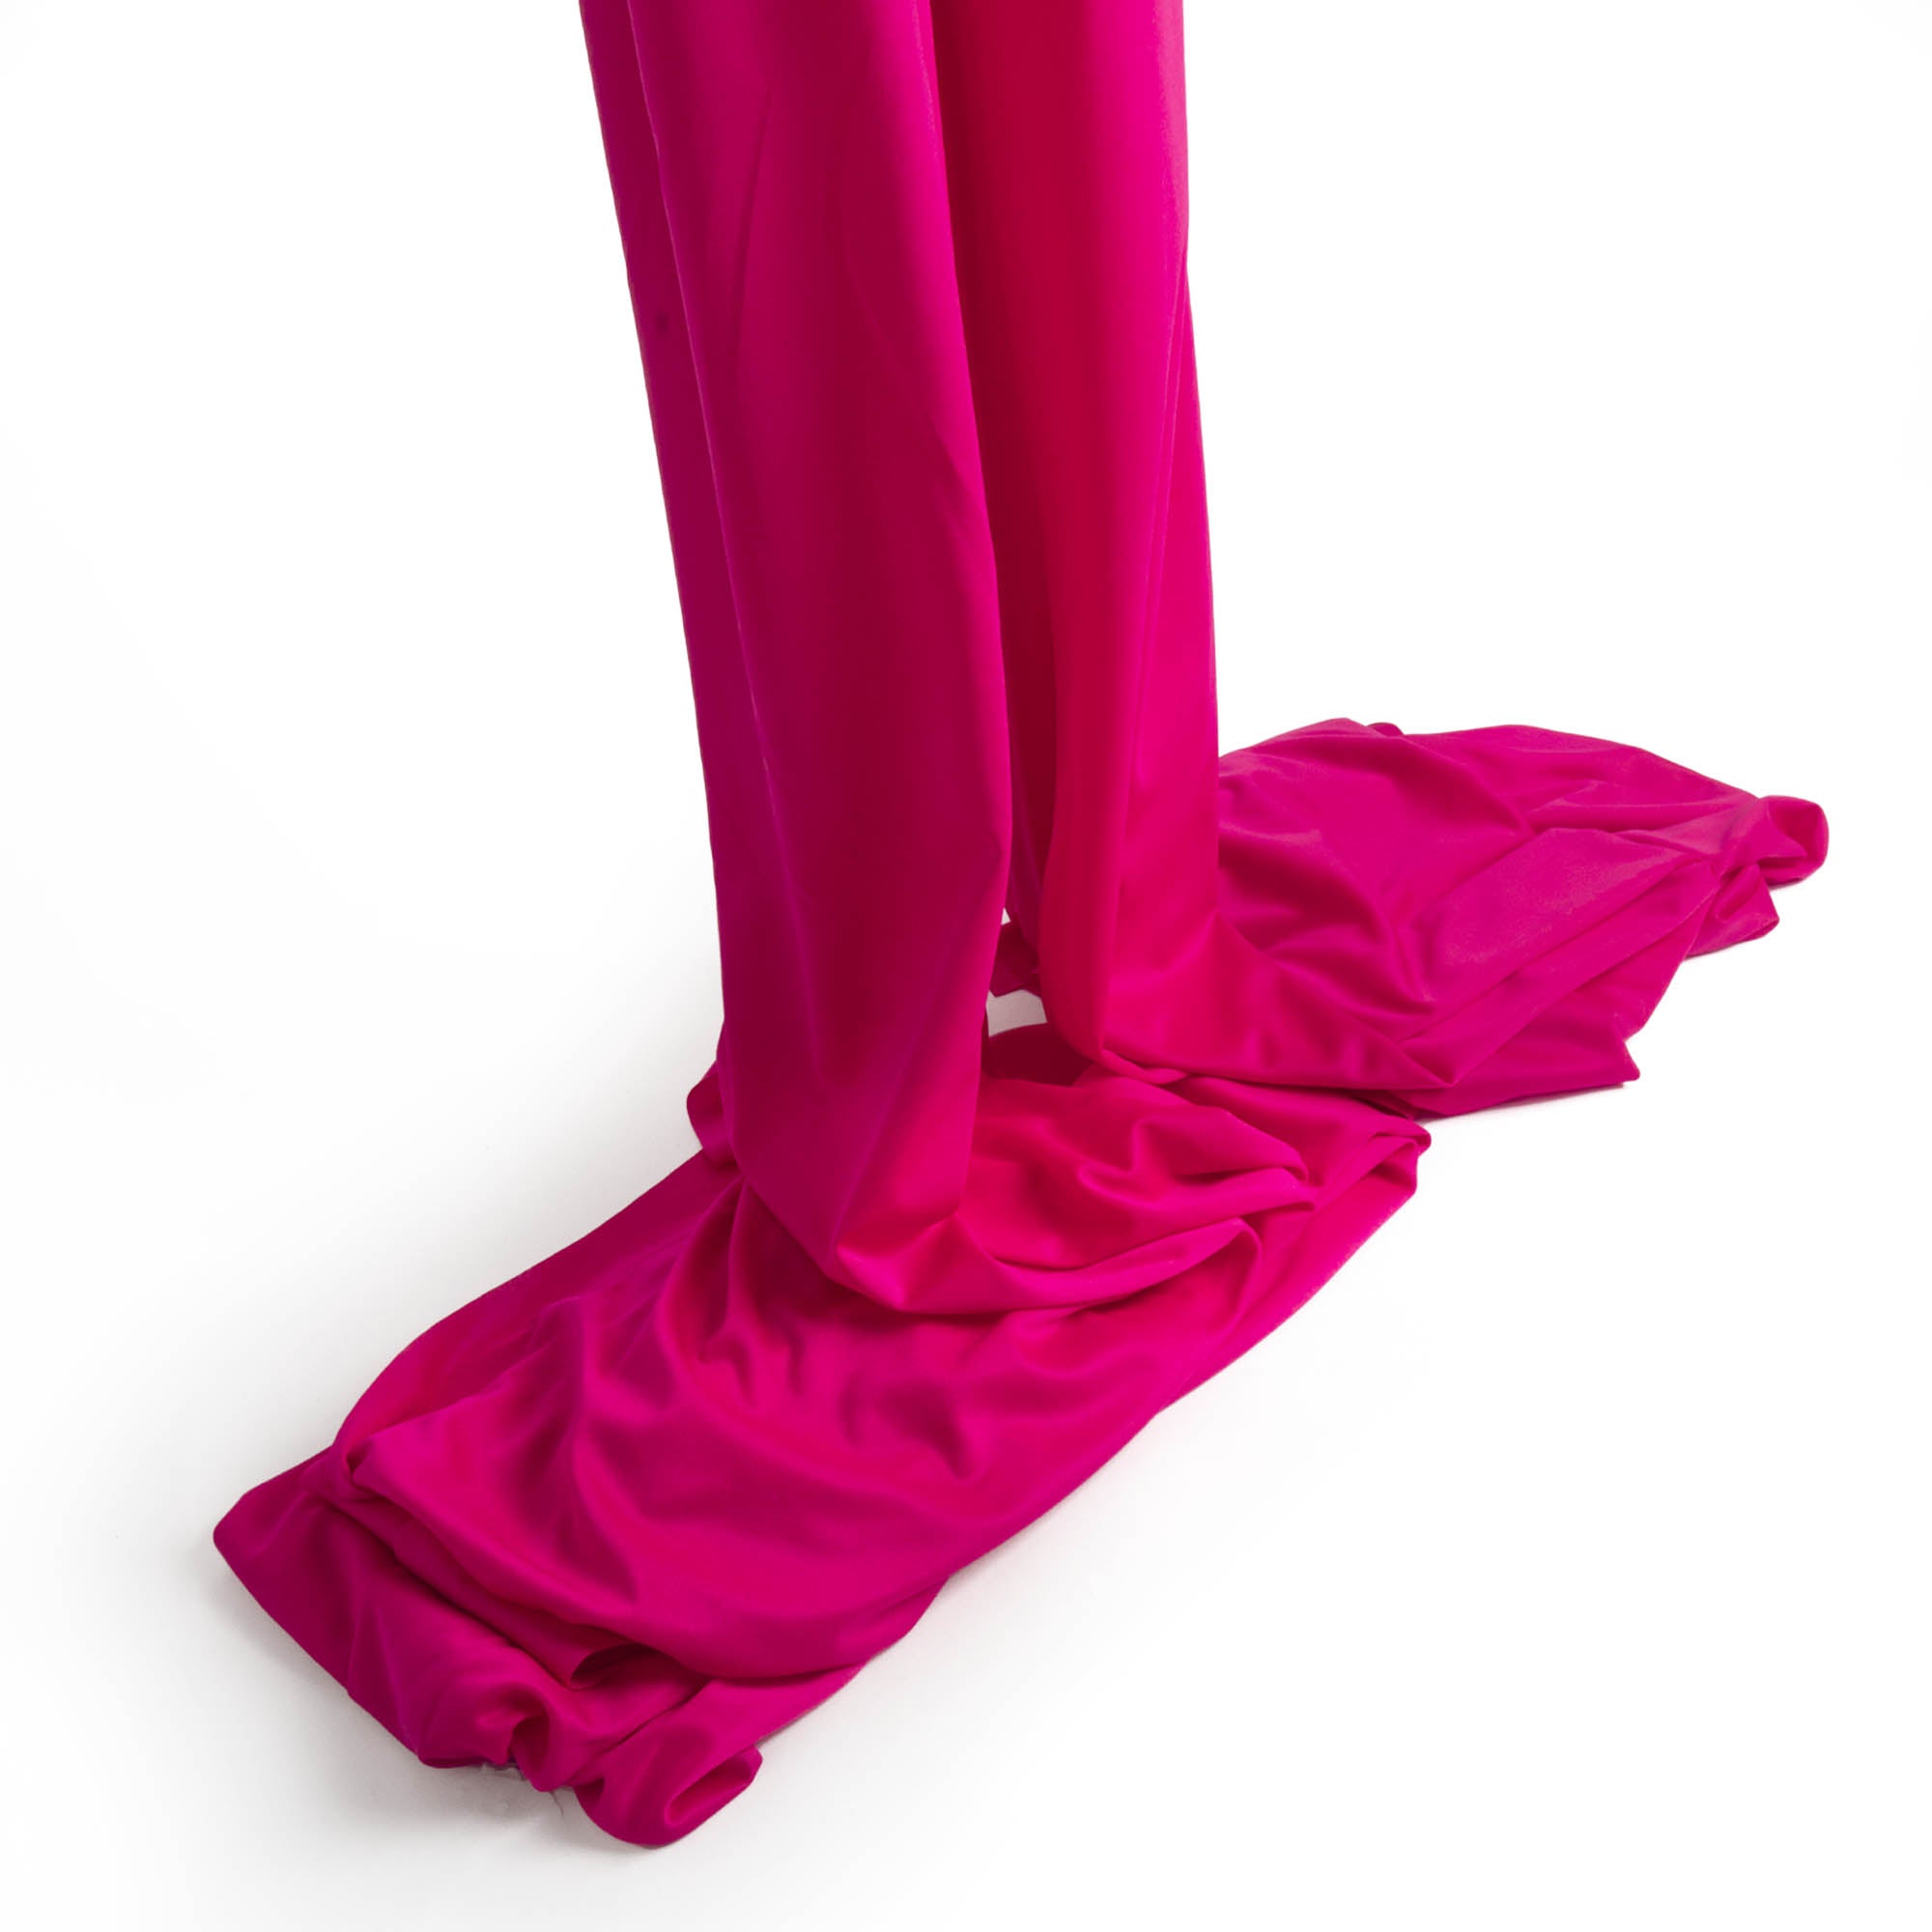 Hot pink silk folded ends